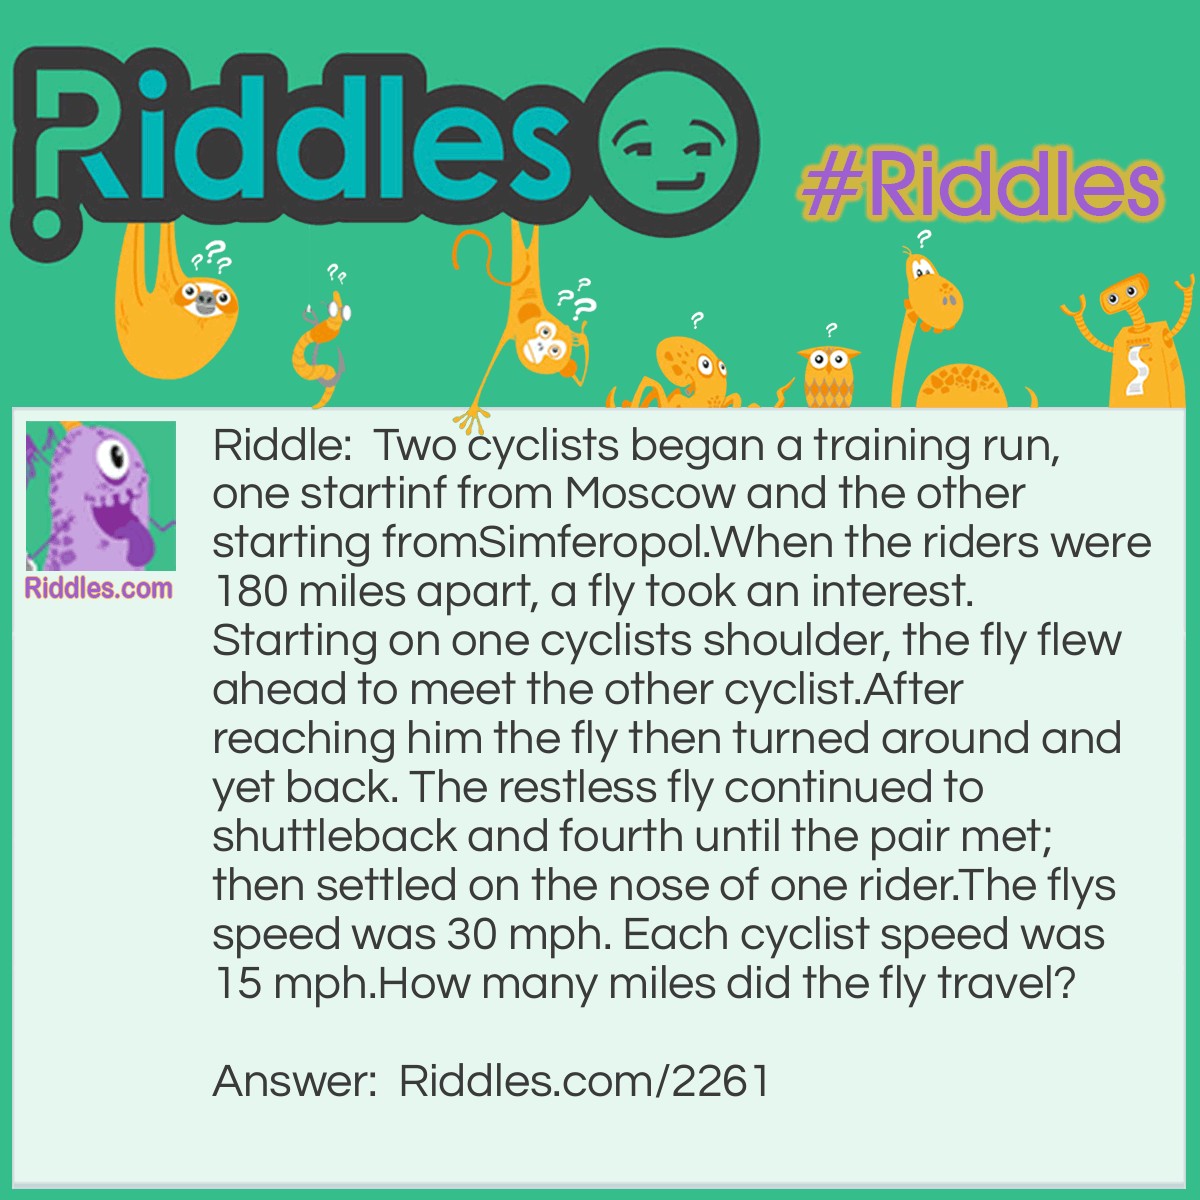 Riddle: Two cyclists began a training run, one starting from Moscow and the other starting from Simferopol.
When the riders were 180 miles apart, a fly took an interest. Starting on one cyclists shoulder, the fly flew ahead to meet the other cyclist. After reaching him the fly then turned around and yet back. 
The restless fly continued to shuttleback and fourth until the pair met; then settled on the nose of one rider.
The flys speed was 30 mph. Each cyclist speed was 15 mph.
How many miles did the fly travel? Answer: The cyclists took 6 hours to meet. The fly traveled 6*30=180 miles.